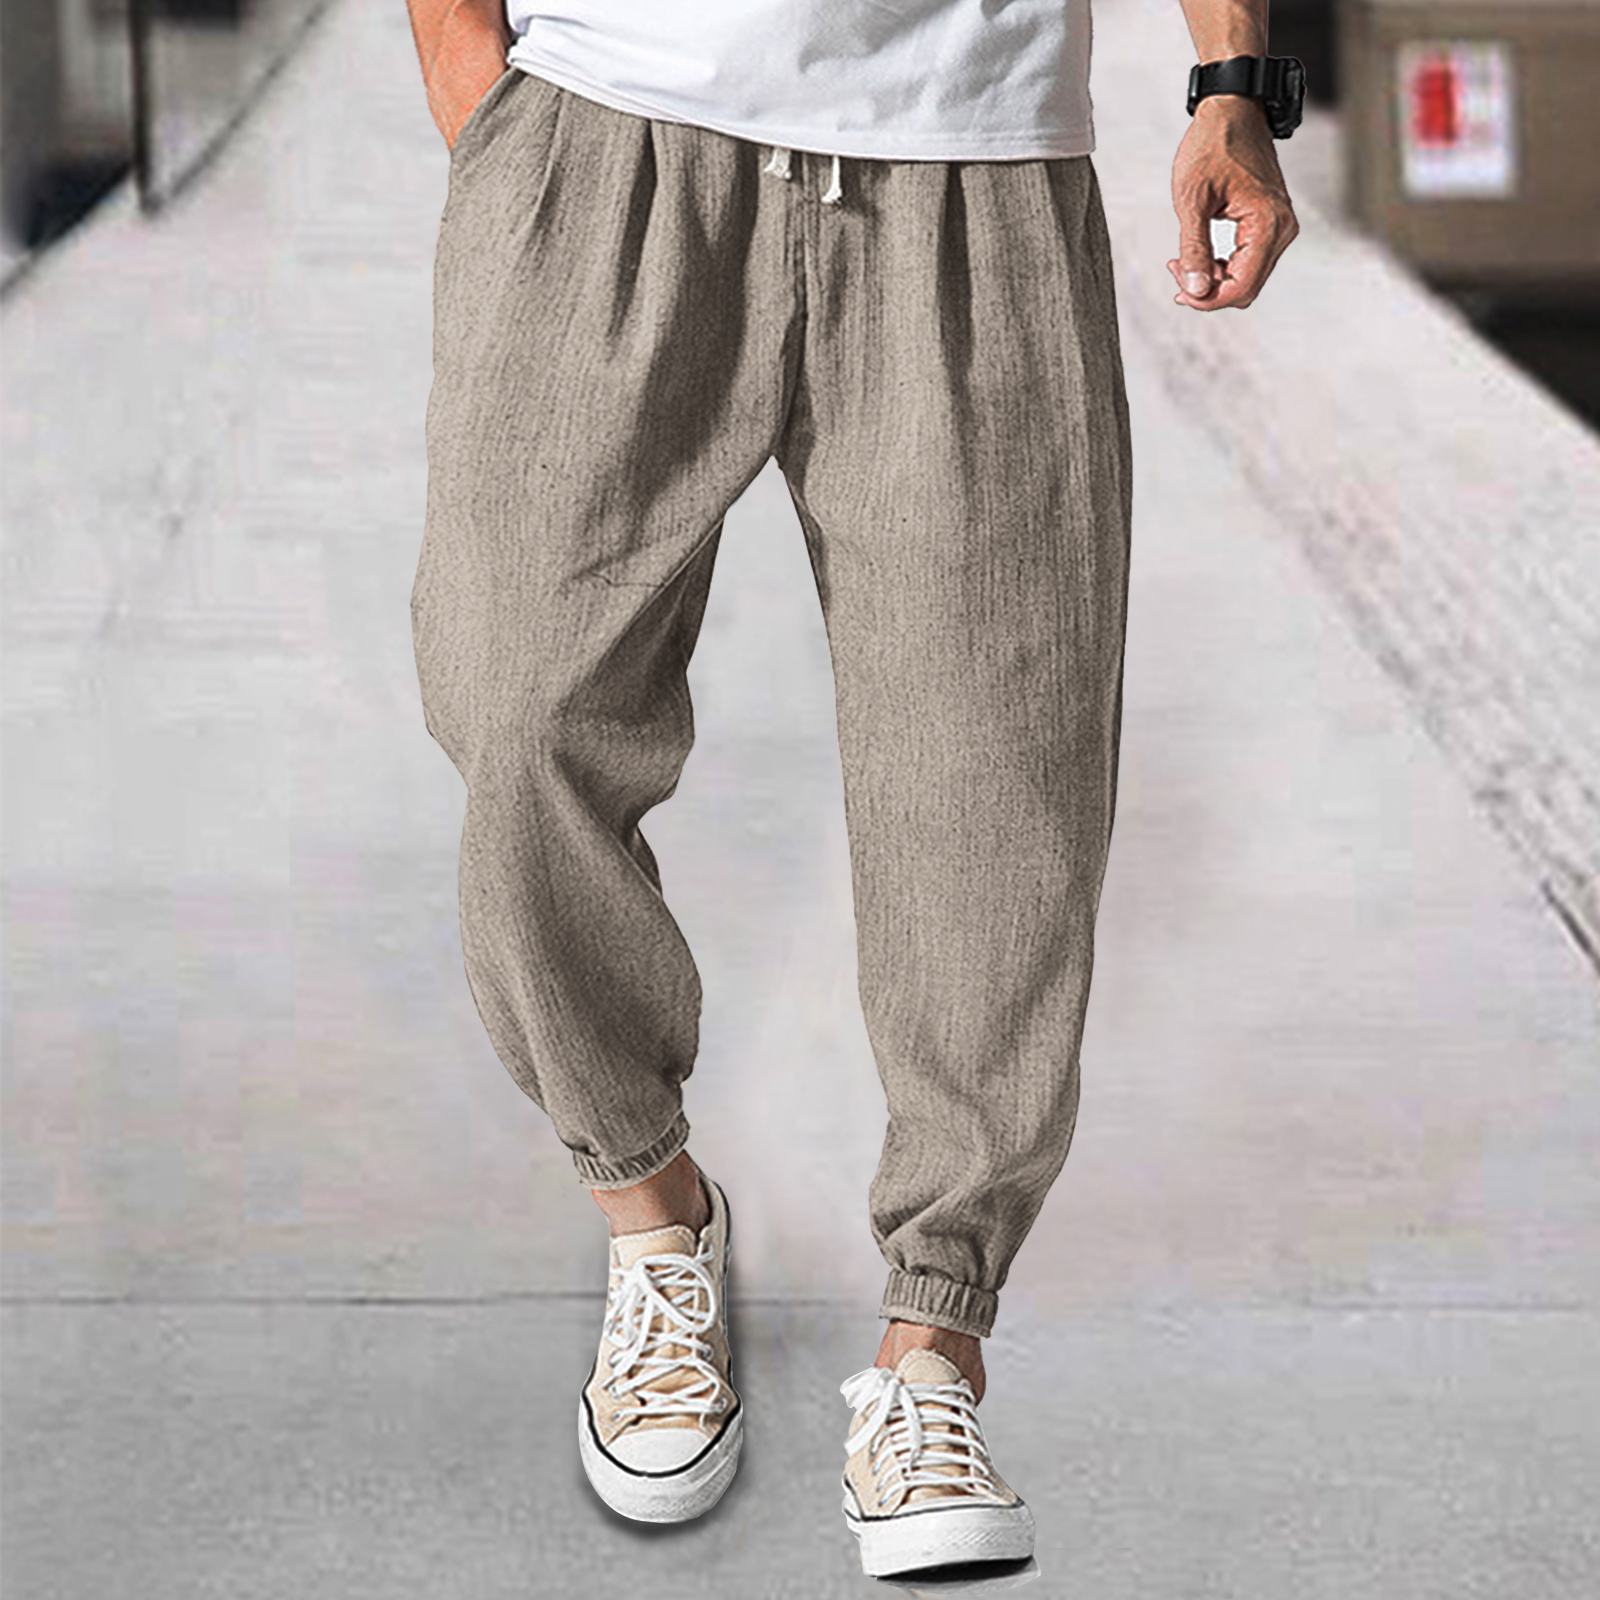 Men's Linen Casual Bloomers Chic Harem Belted Pants